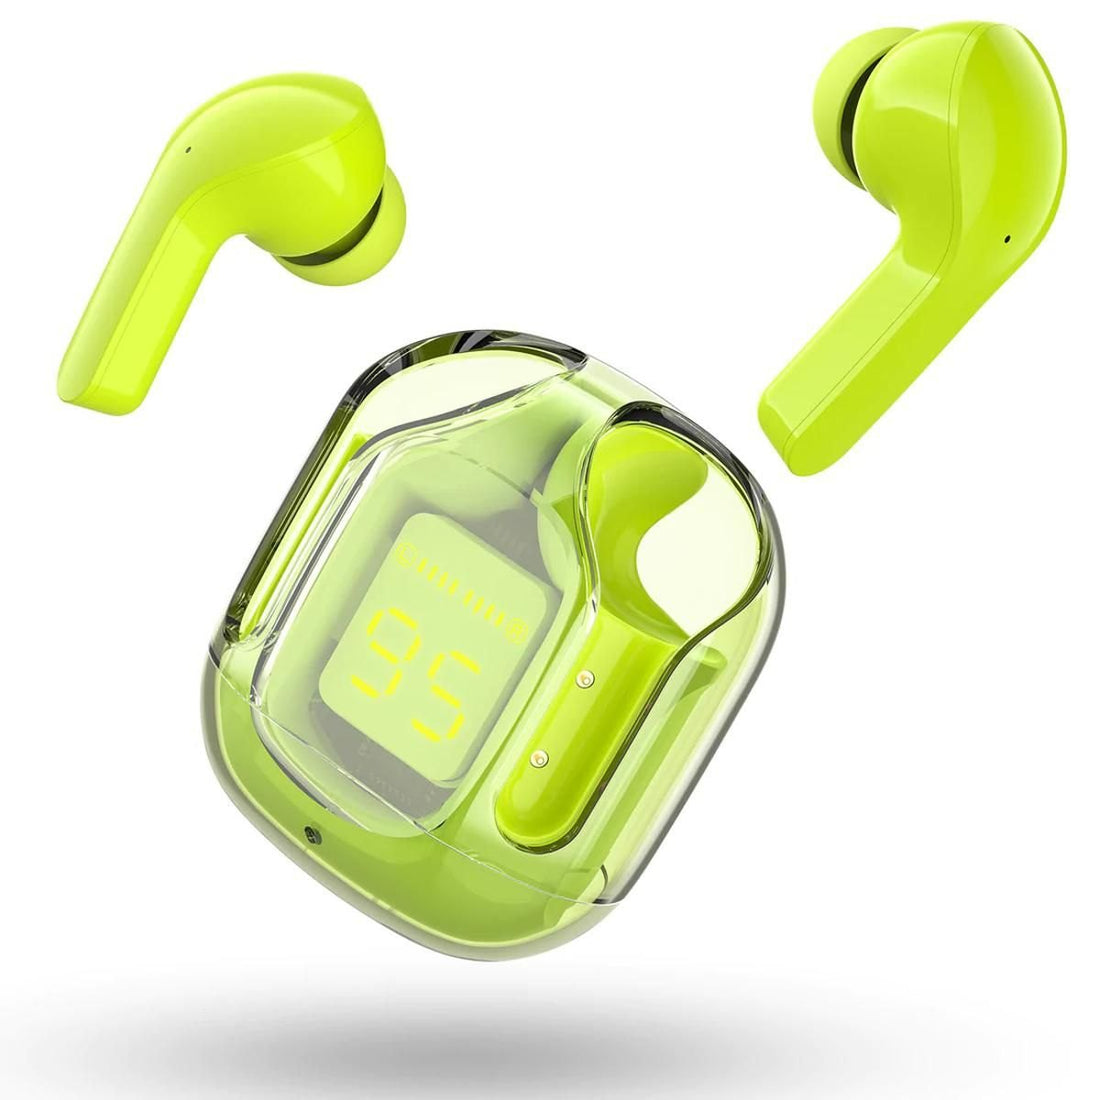 Flex Air 31 TWS Transparent Earbuds ( Color in-stock will be proceeded) - Flex